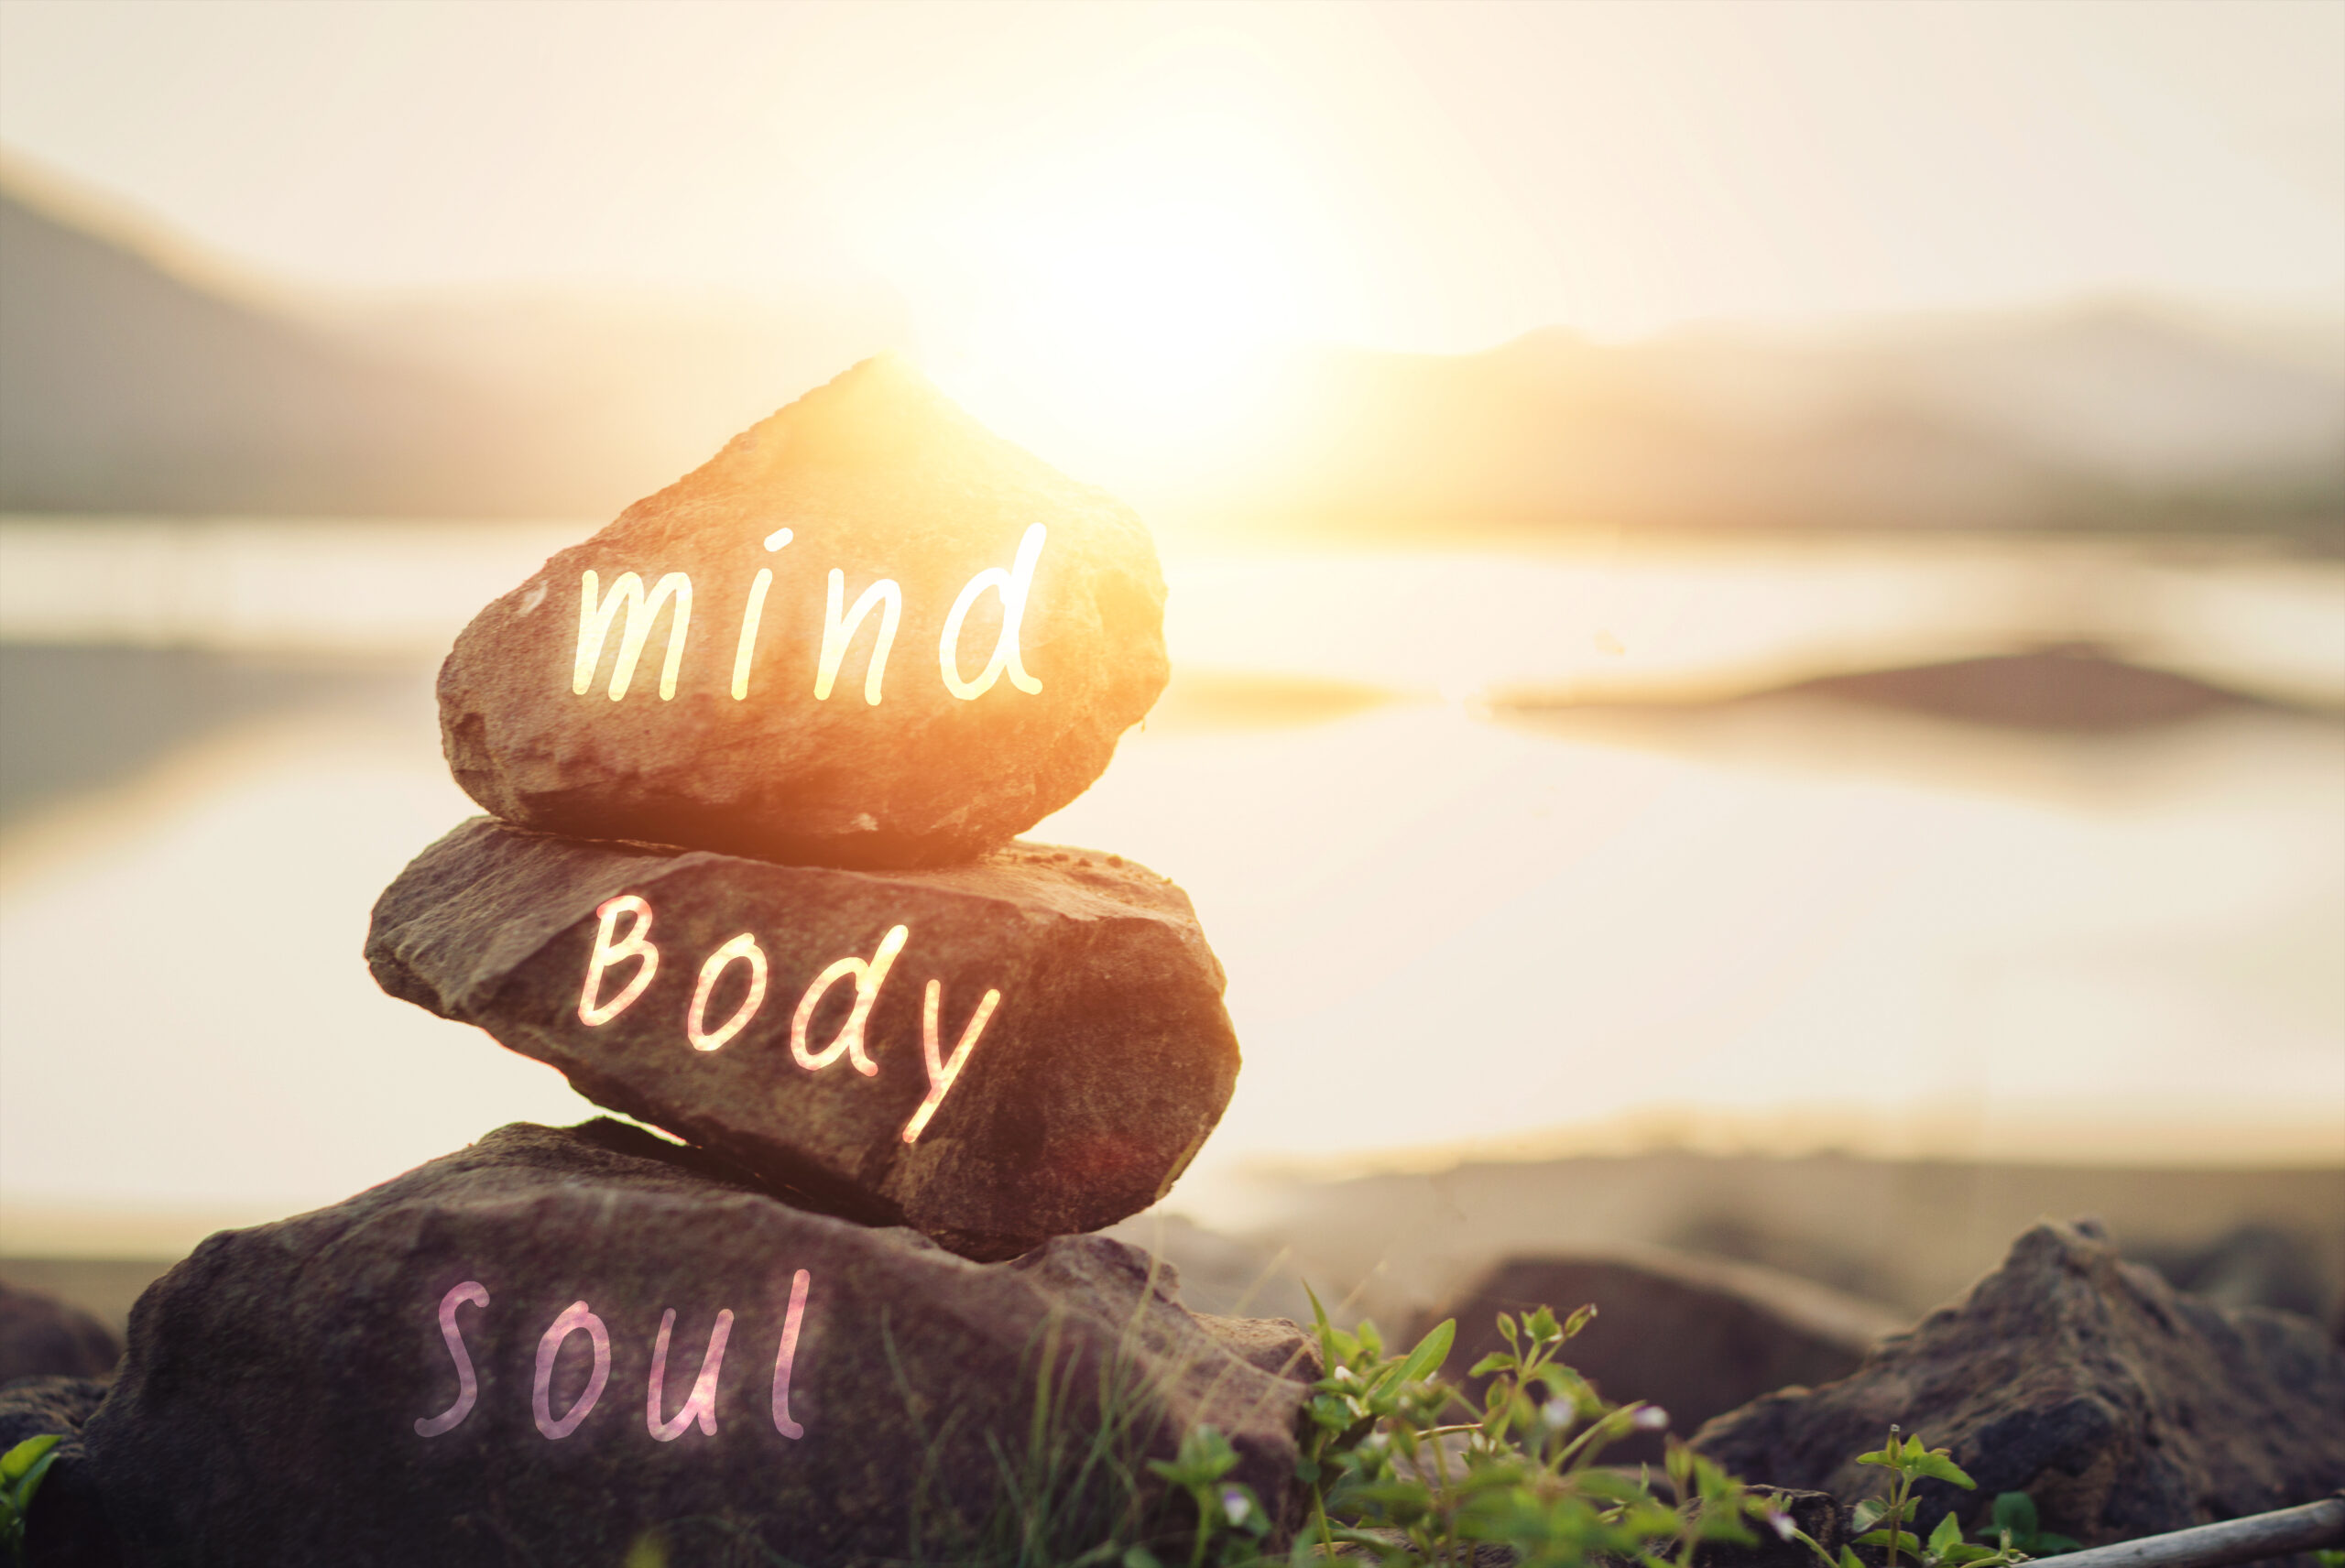 Rocks with the words mind, body, and soul on a bright background, image of new episode of Harvesting Happiness Talk Radio about health & happiness with Lisa Cypers Kamen, Agapi Stassinopoulos & Valentina Onisor.